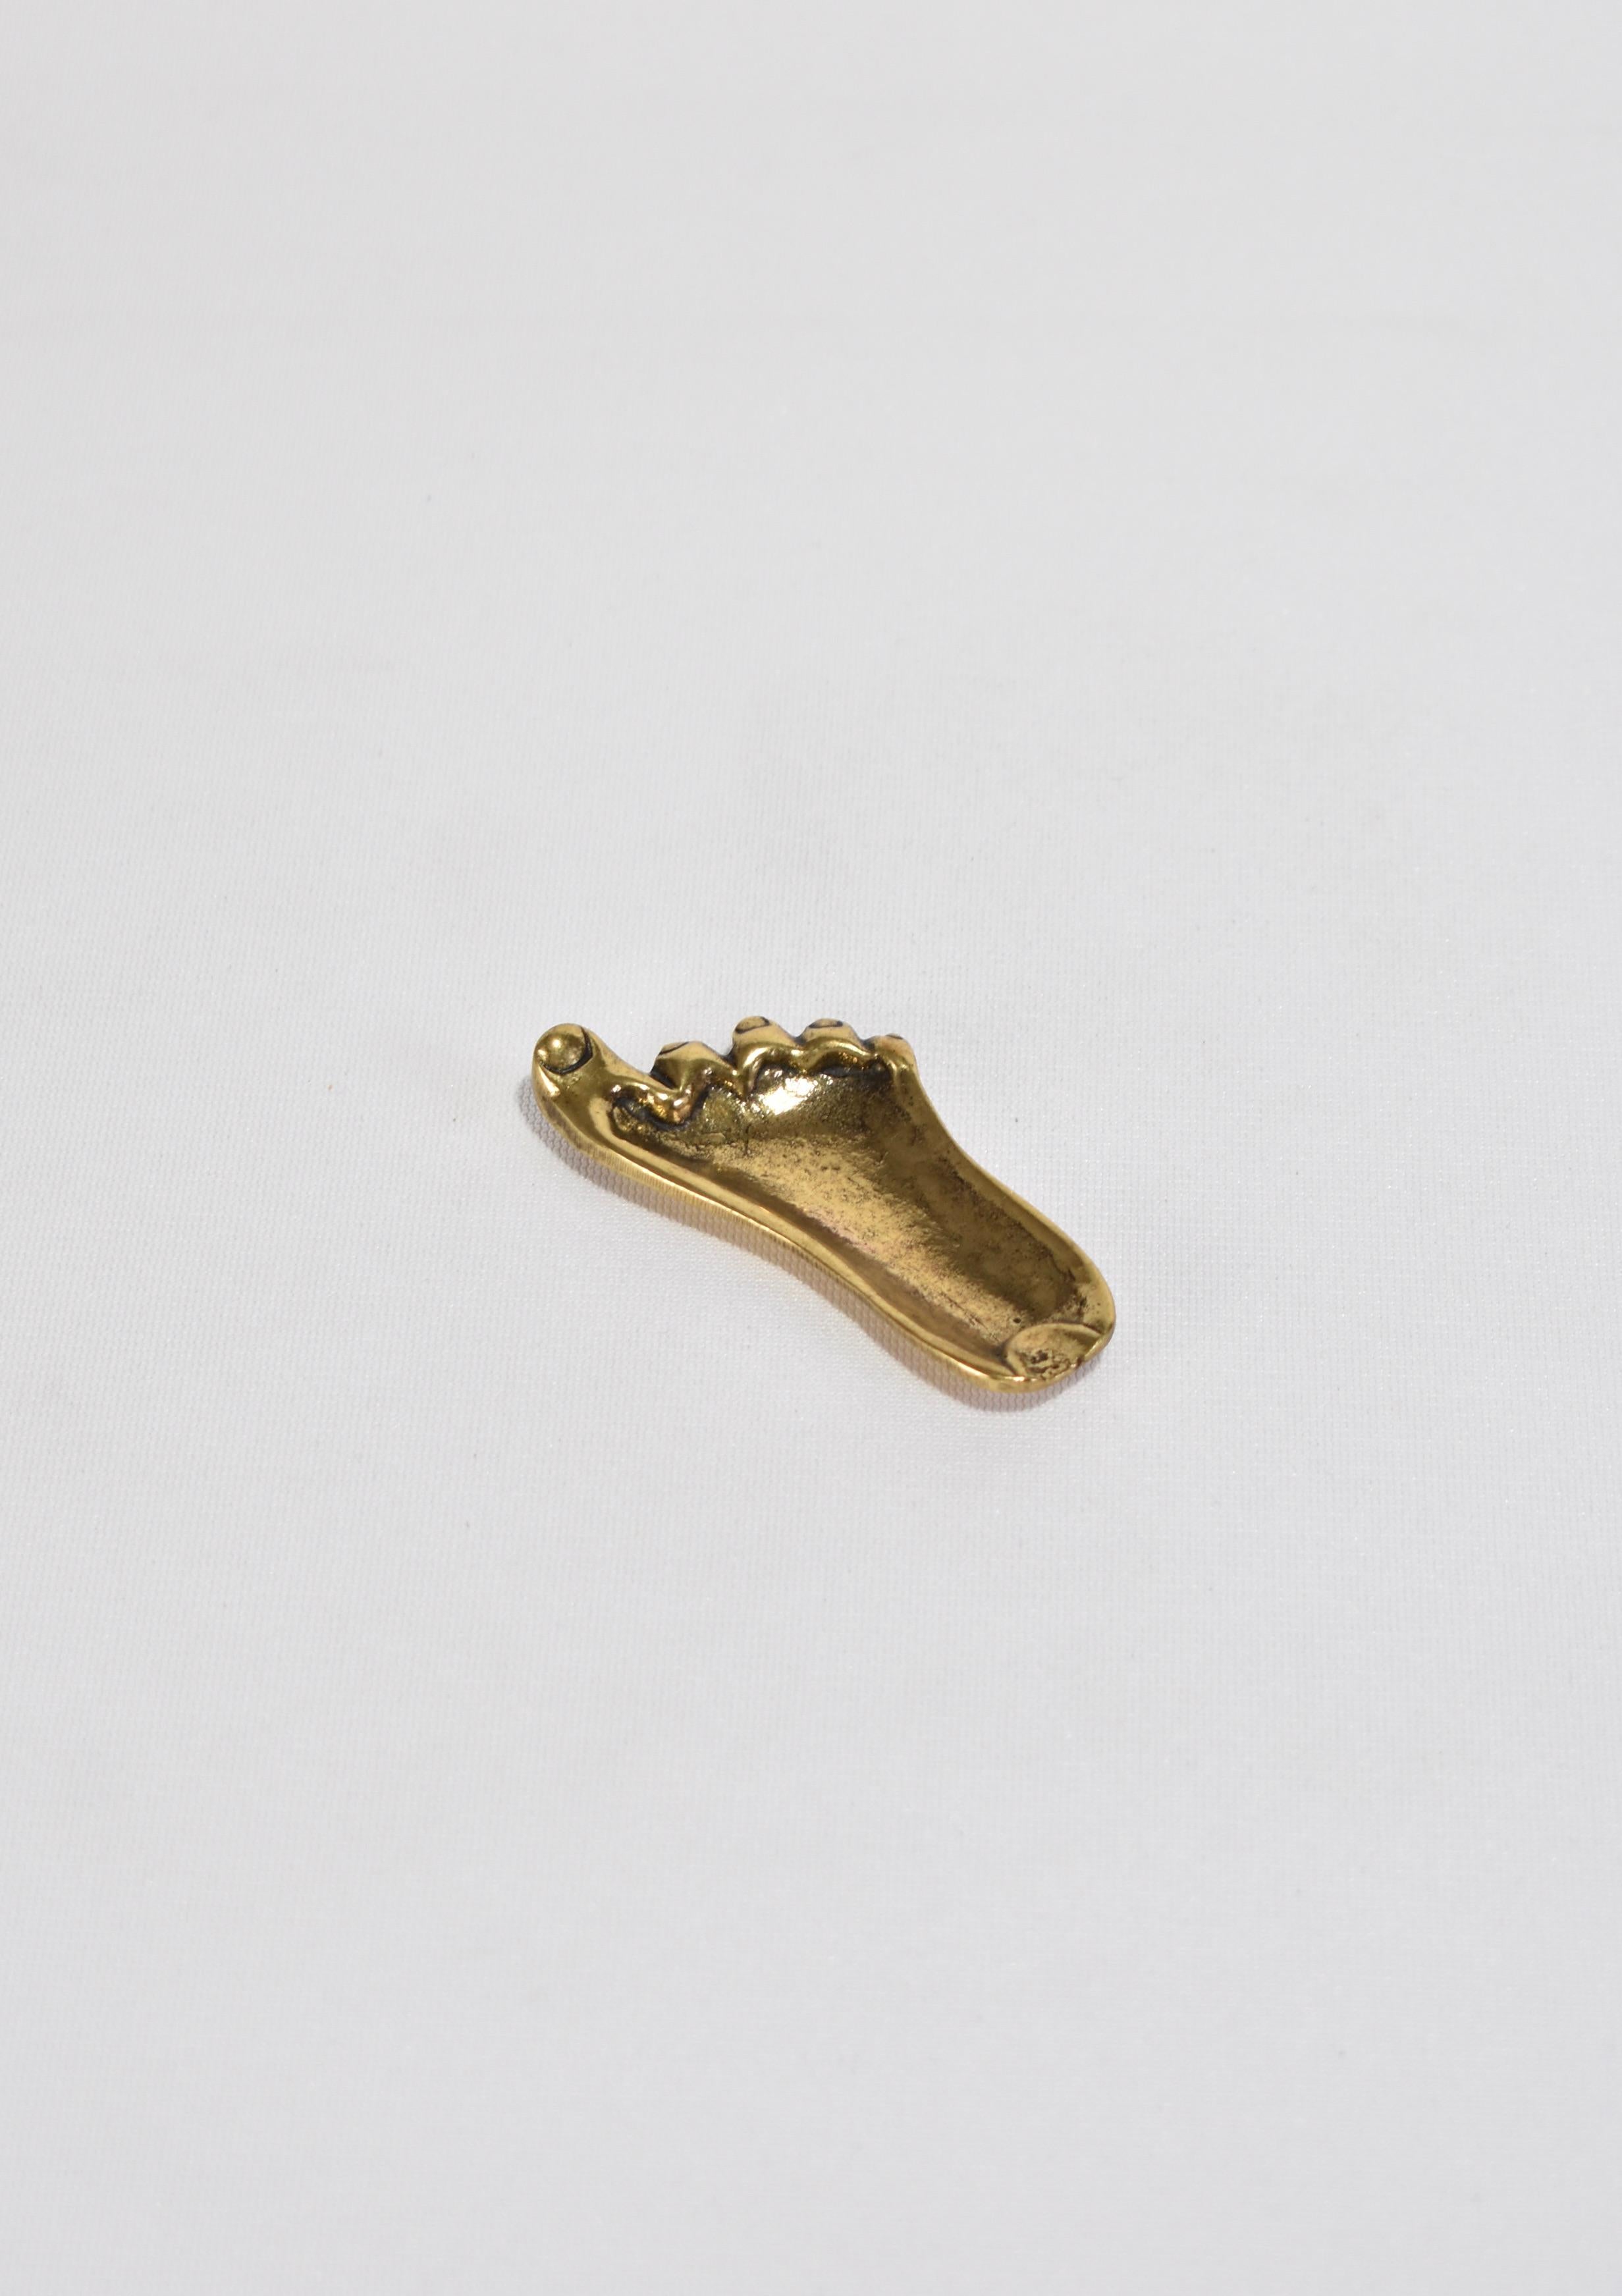 Miniature brass foot object. Perfect size to hold a ring or display on its own as a sculptural piece.